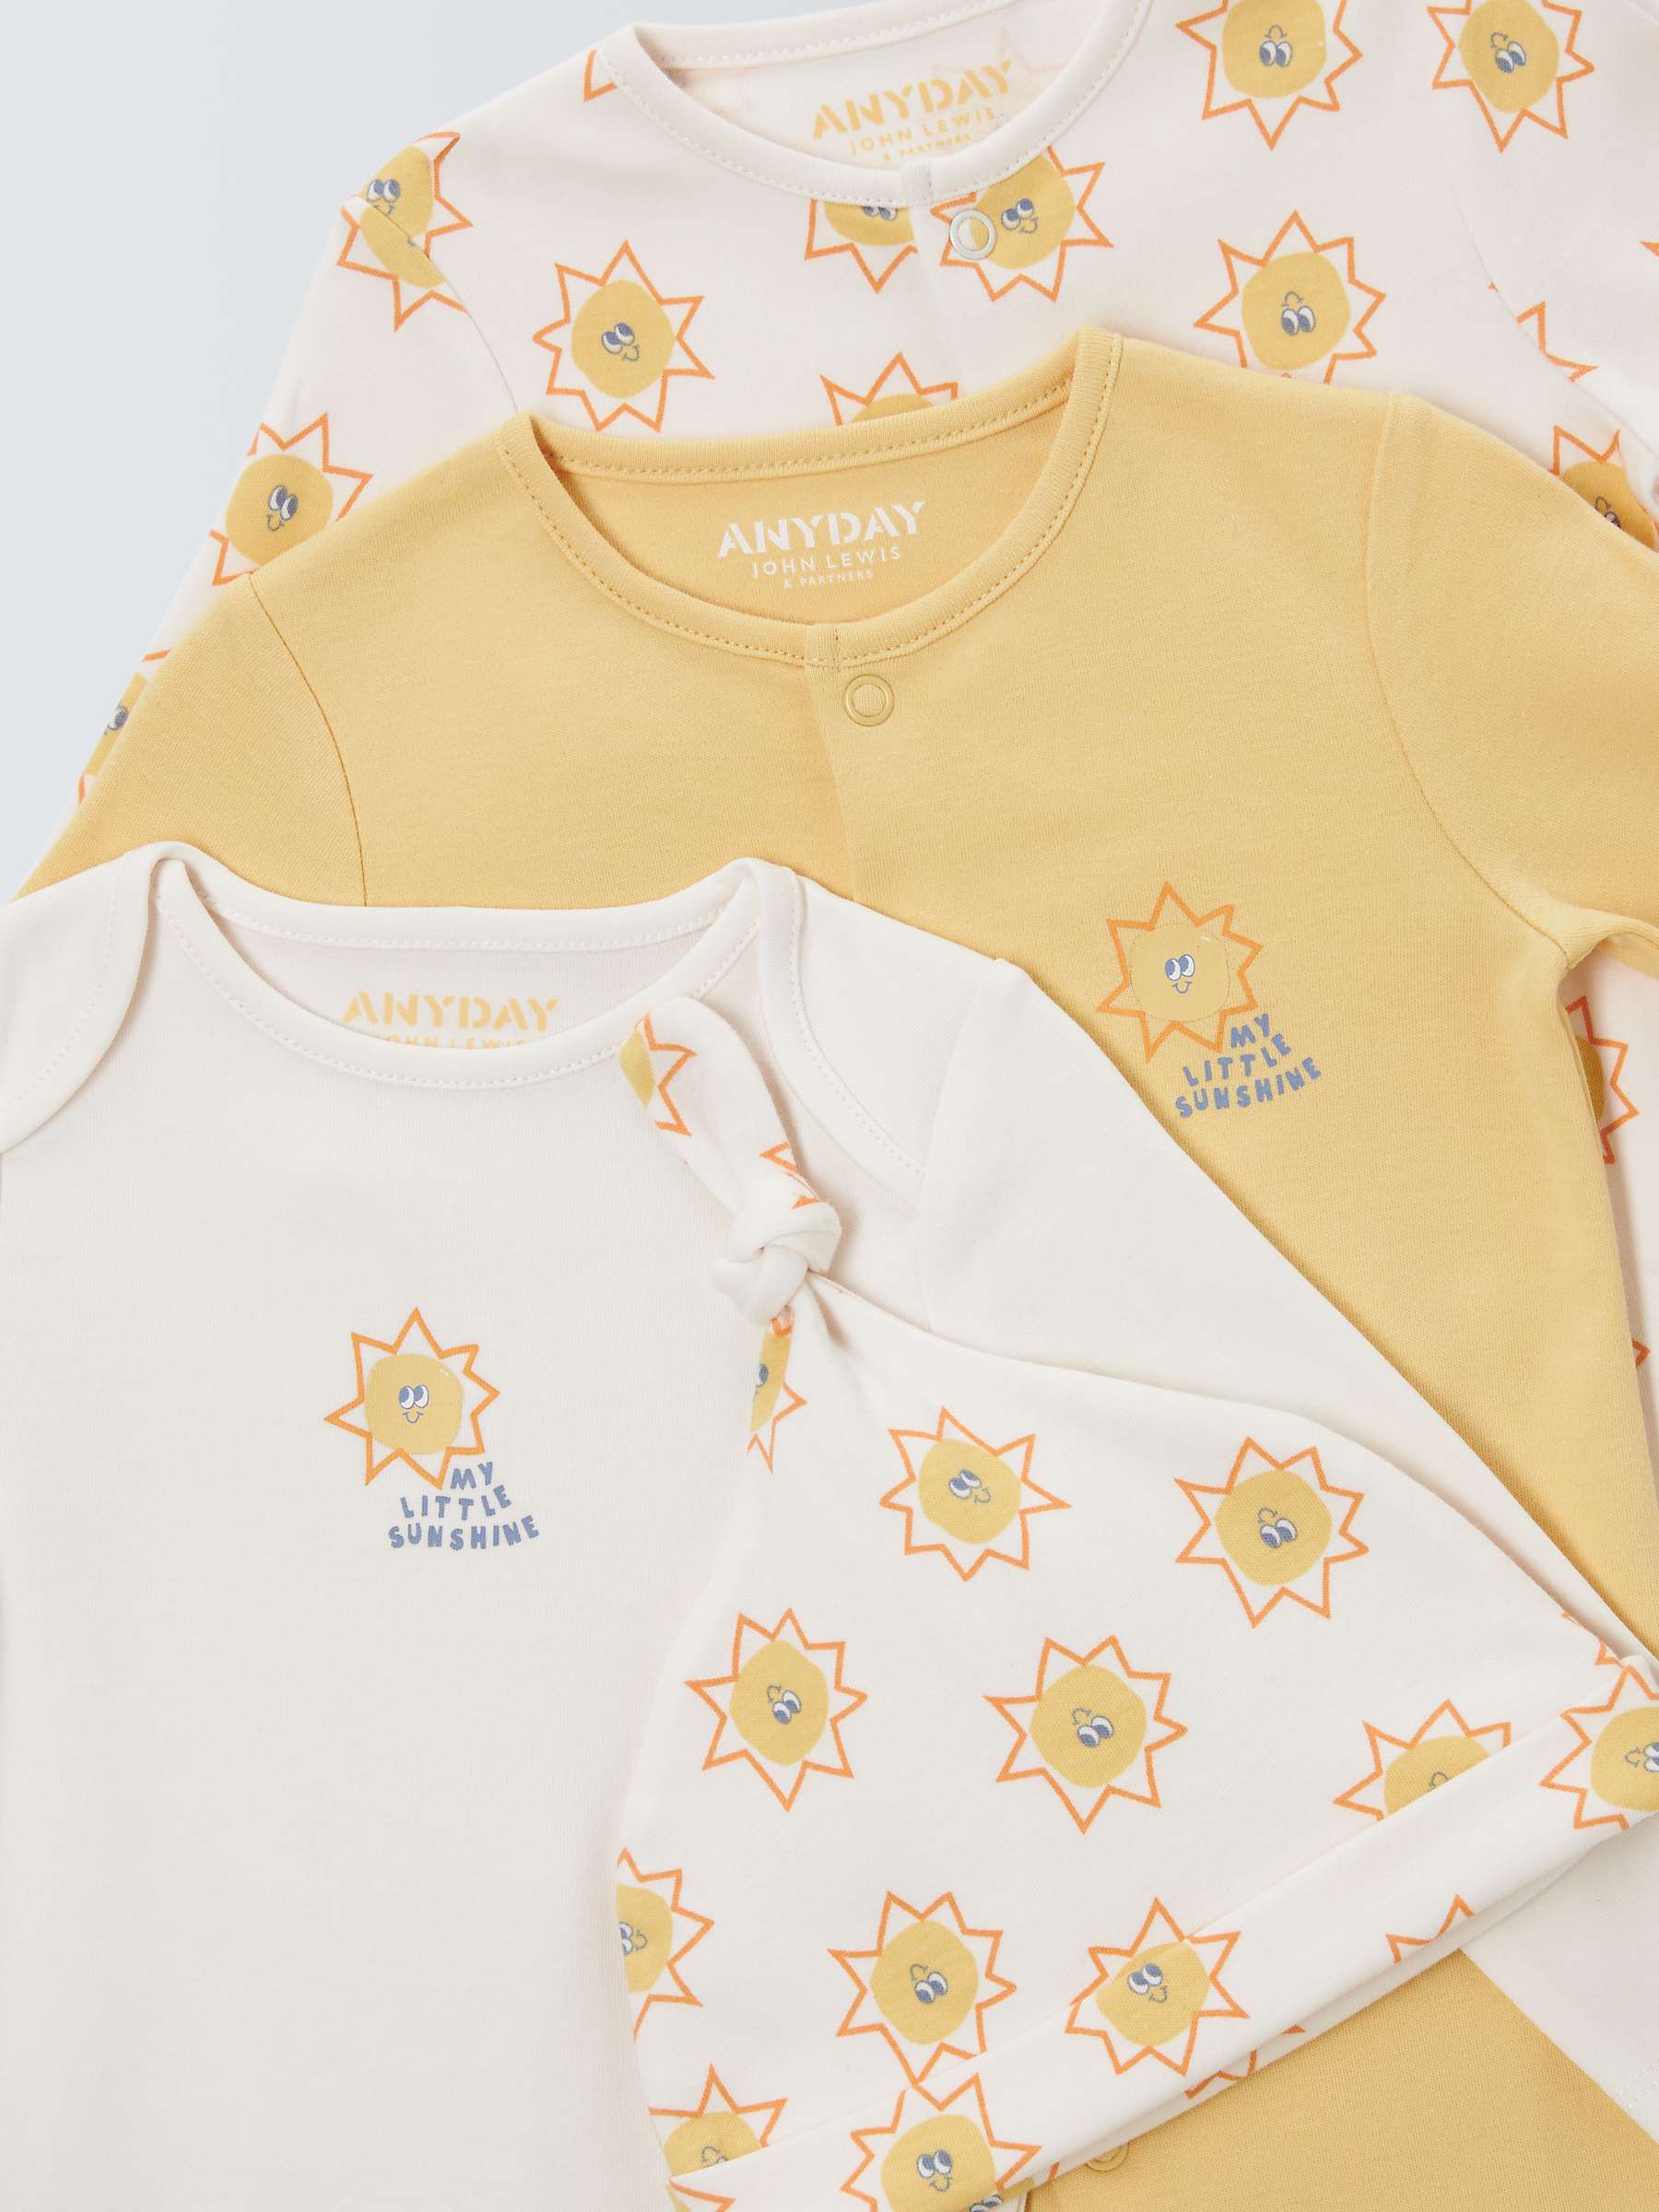 Buy John Lewis ANYDAY Baby Sunflower Sleepsuit, Bodysuit and Hat Set, Yellow Online at johnlewis.com